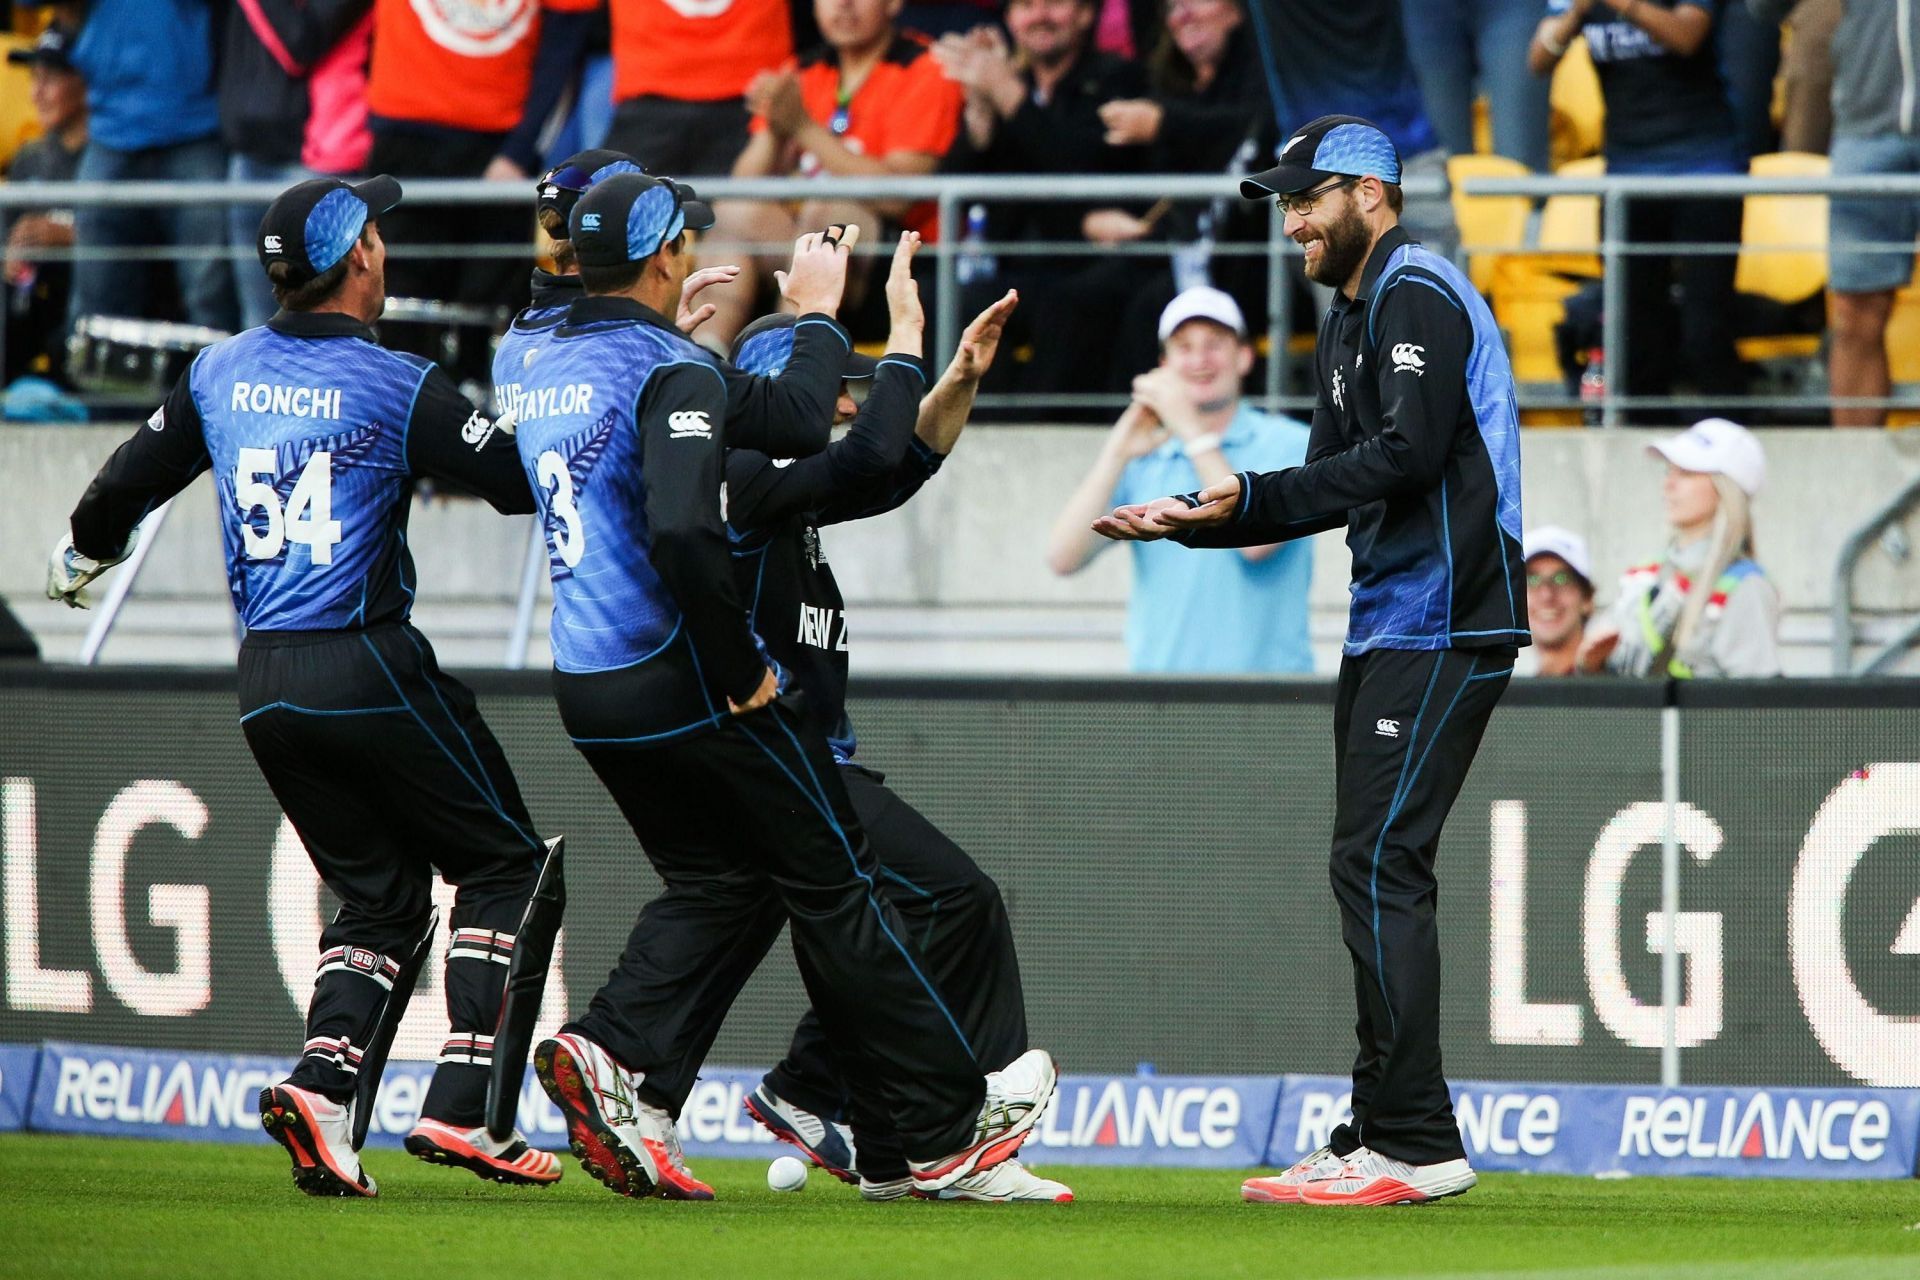 Daniel Vettori at 36 bagged an absolute screamer in the World Cup 2015.